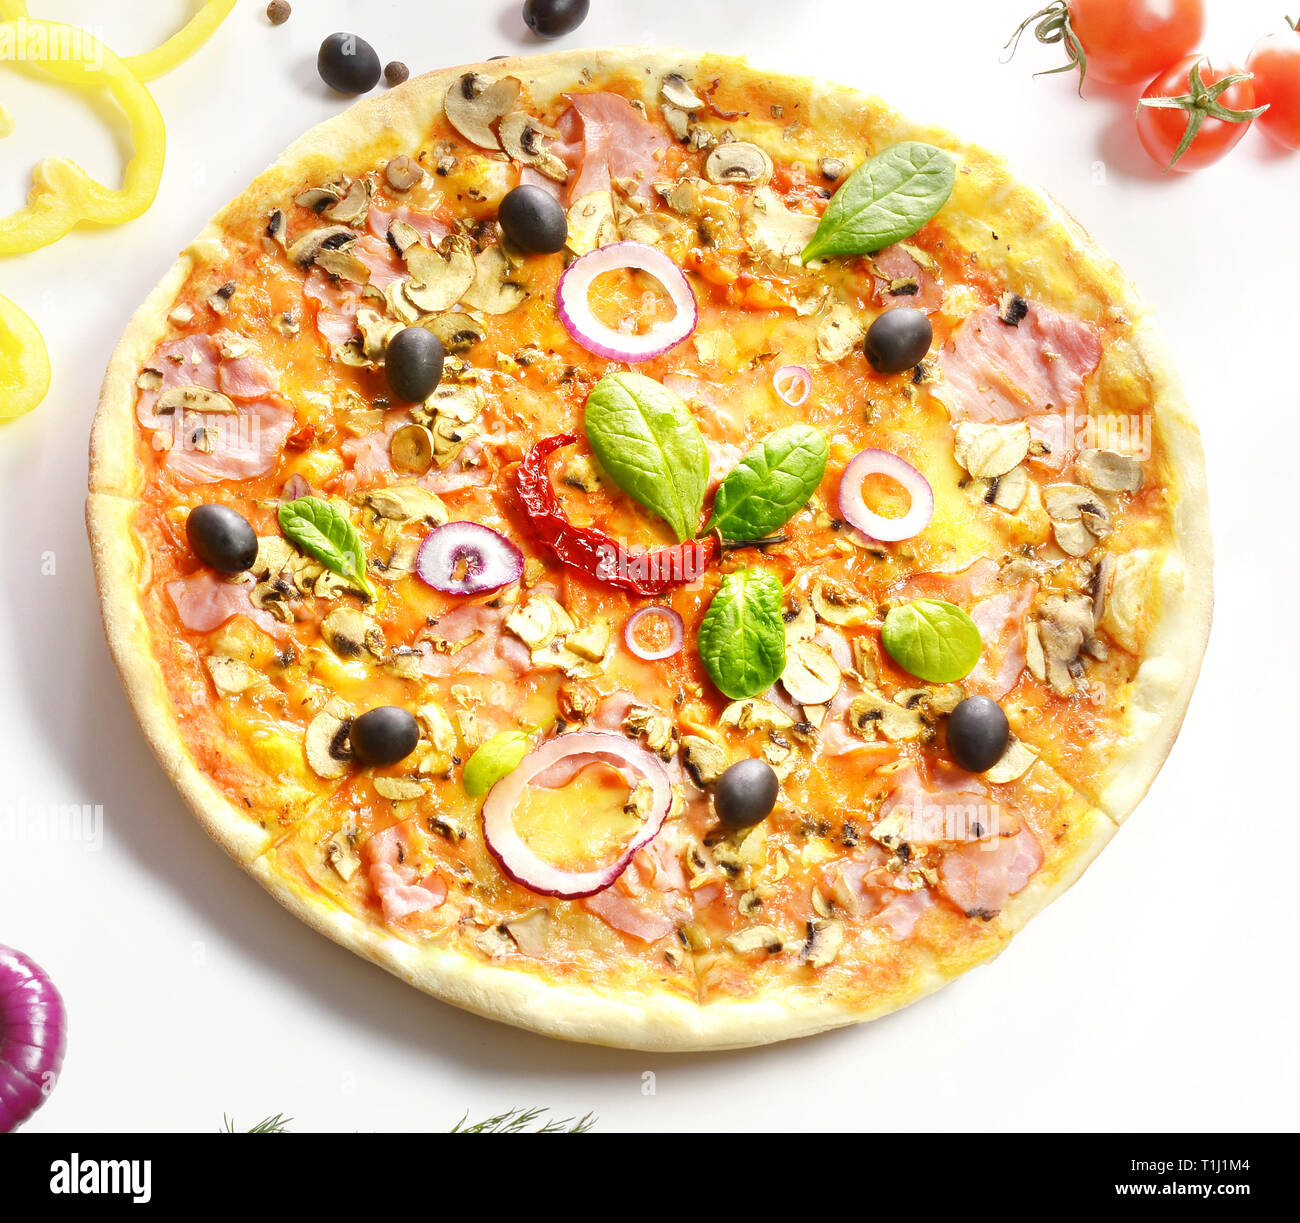 Pizza with mushrooms and cheese Stock Photo